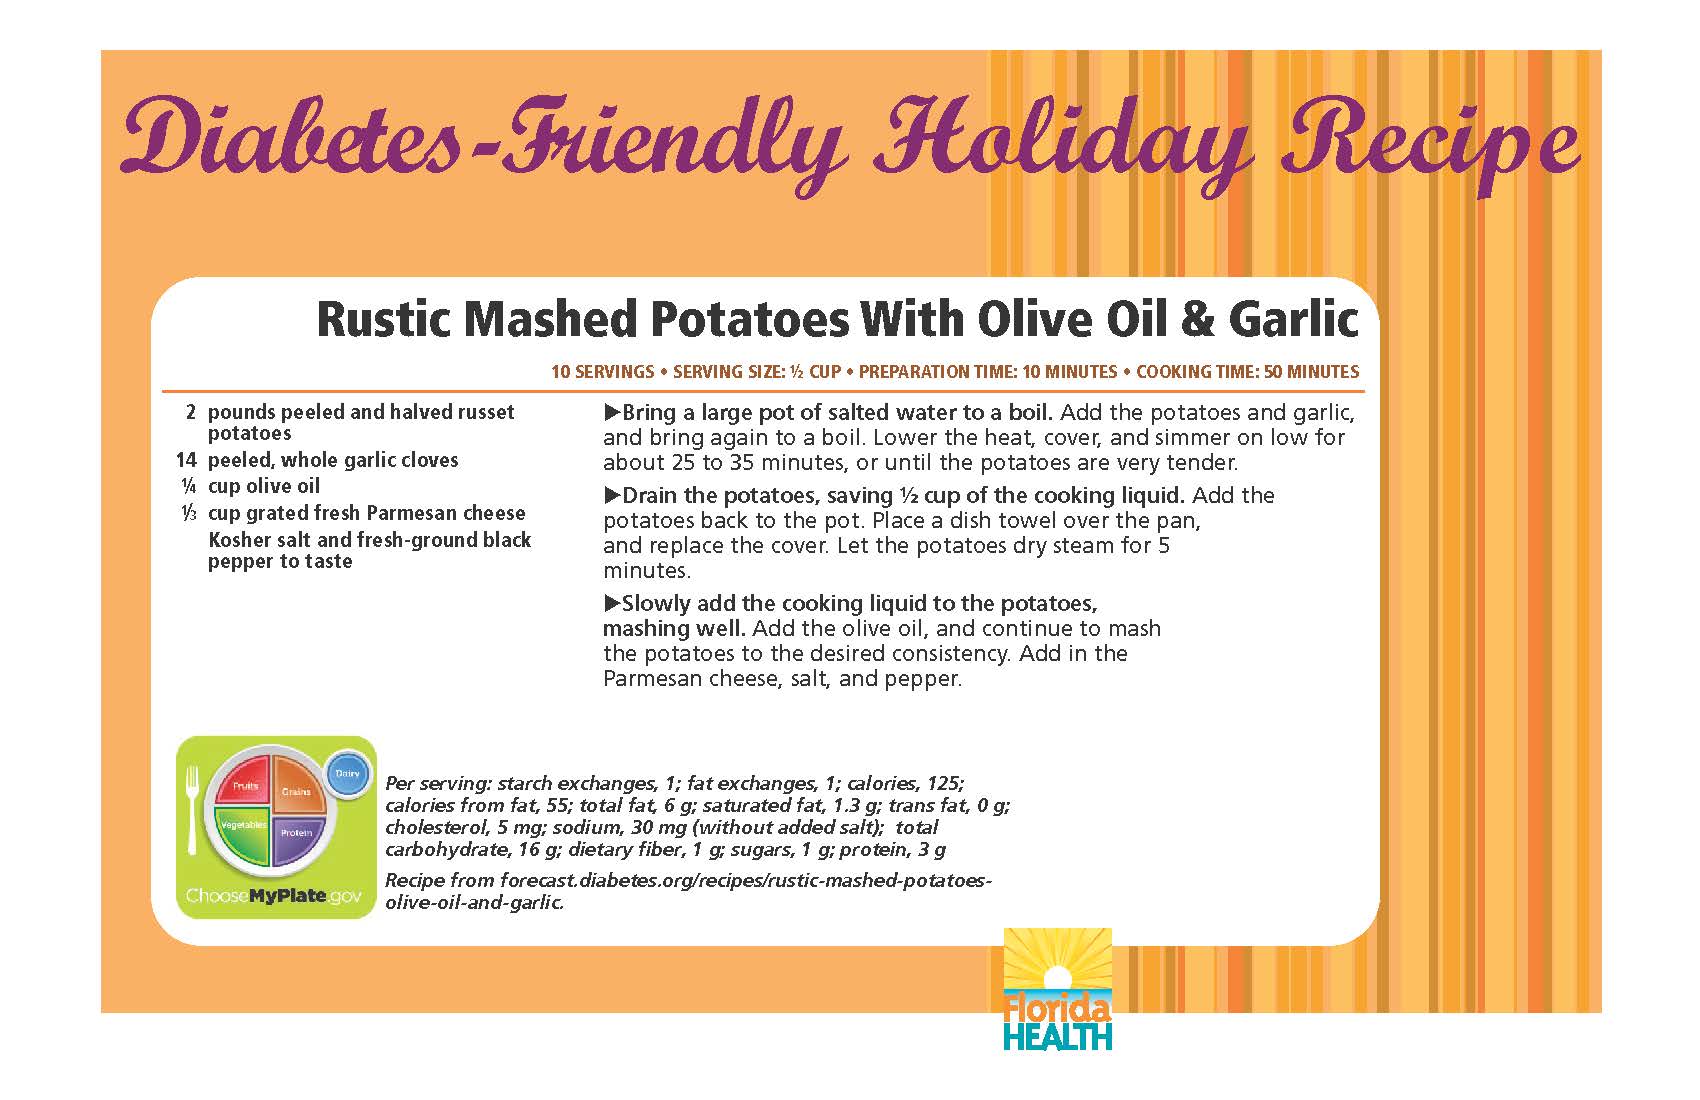 Diabetes-Friendly Holiday Recipe Rustic Mashed Potatoes With Olive Oil & Garlic 10 servings • serving size: ½ cup • preparation time: 10 minutes • cooking time: 50 minutes 2 pounds peeled and halved russet potatoes 14 peeled, whole garlic cloves ¼ cup olive oil 1⁄3 cup grated fresh parmesan cheese kosher salt and fresh-ground black pepper to taste Rustic Mashed Potatoes With Olive Oil & Garlic 10 servings • serving size: ½ cup • preparation time: 10 minutes • cooking time: 50 minutes Bring a large pot of salted water to a boil. Add the potatoes and garlic, and bring again to a boil. Lower the heat, cover, and simmer on low for about 25 to 35 minutes, or until the potatoes are very tender. Drain the potatoes, saving ½ cup of the cooking liquid. Add the potatoes back to the pot. Place a dish towel over the pan, and replace the cover. Let the potatoes dry steam for 5 minutes. Slowly add the cooking liquid to the potatoes, mashing well. Add the olive oil, and continue to mash the potatoes to the desired consistency. Add in the Parmesan cheese, salt, and pepper. Per serving: starch exchanges, 1; fat exchanges, 1; calories, 125; calories from fat, 55; total fat, 6 g; saturated fat, 1.3 g; trans fat, 0 g; cholesterol, 5 mg; sodium, 30 mg (without added salt); total carbohydrate, 16 g; dietary fiber, 1 g; sugars, 1 g; protein, 3 g Recipe from forecast.diabetes.org/recipes/rustic-mashed-potatoesolive- oil-and-garlic.